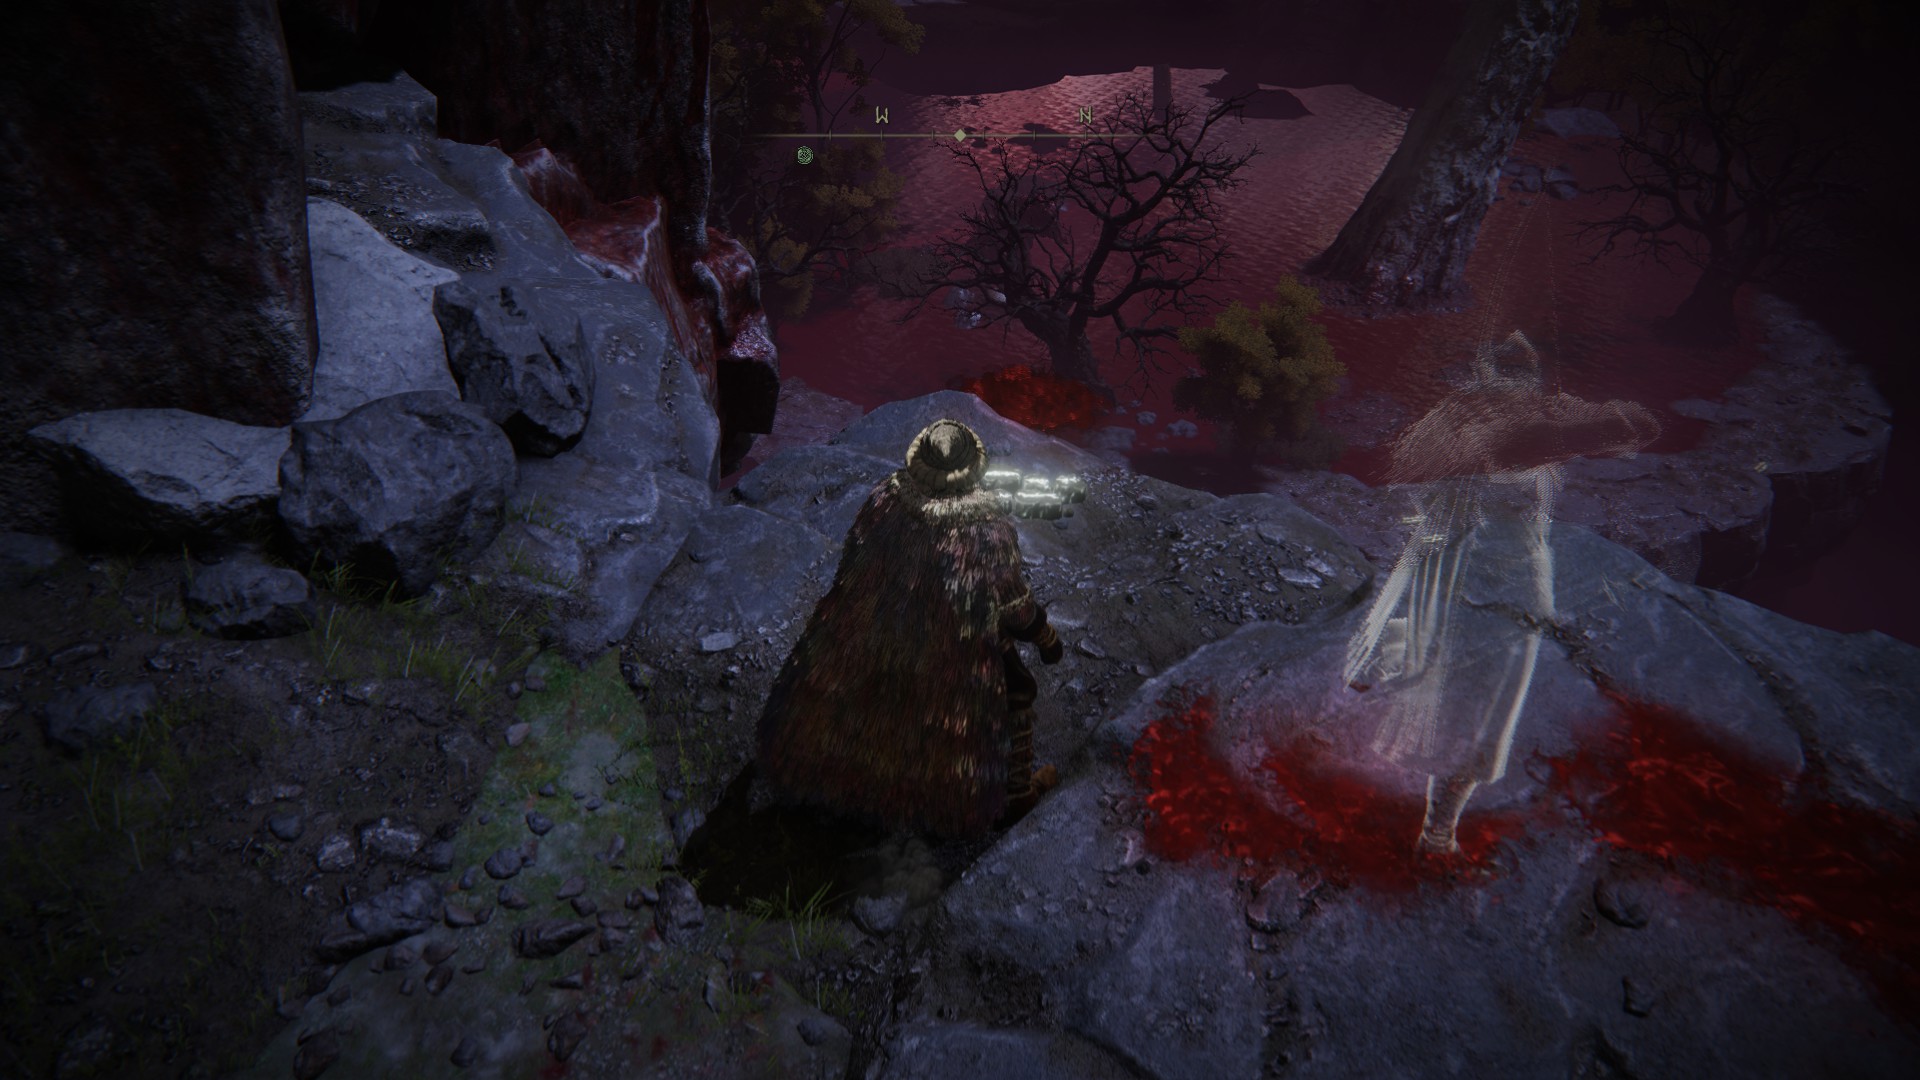 Screenshot from Elden Ring: a player character observes a large crow patrolling a lake of blood from the other side of a ravine.